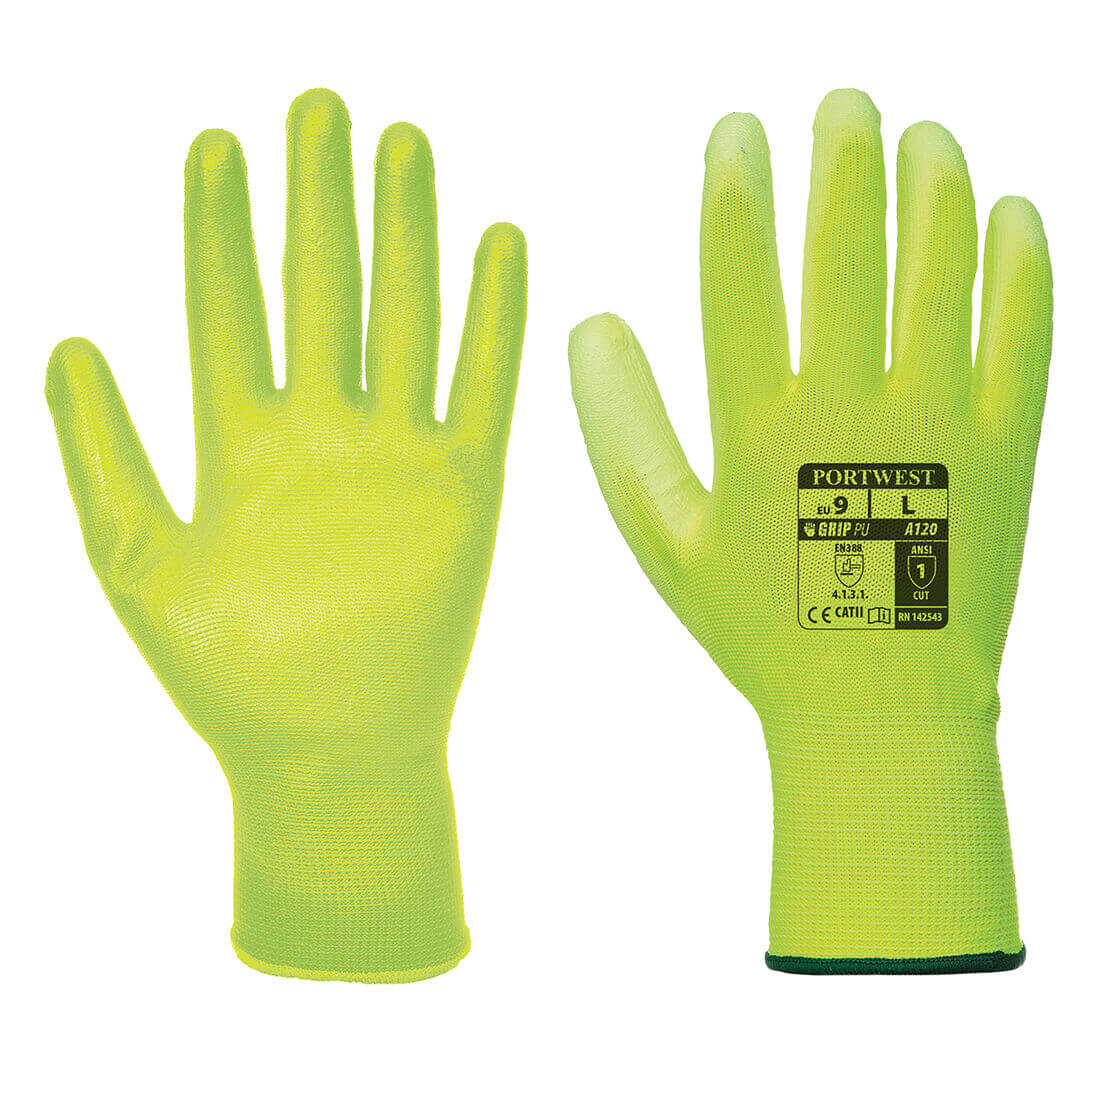 Image of Portwest PU Palm General Handling Grip Gloves Yellow M